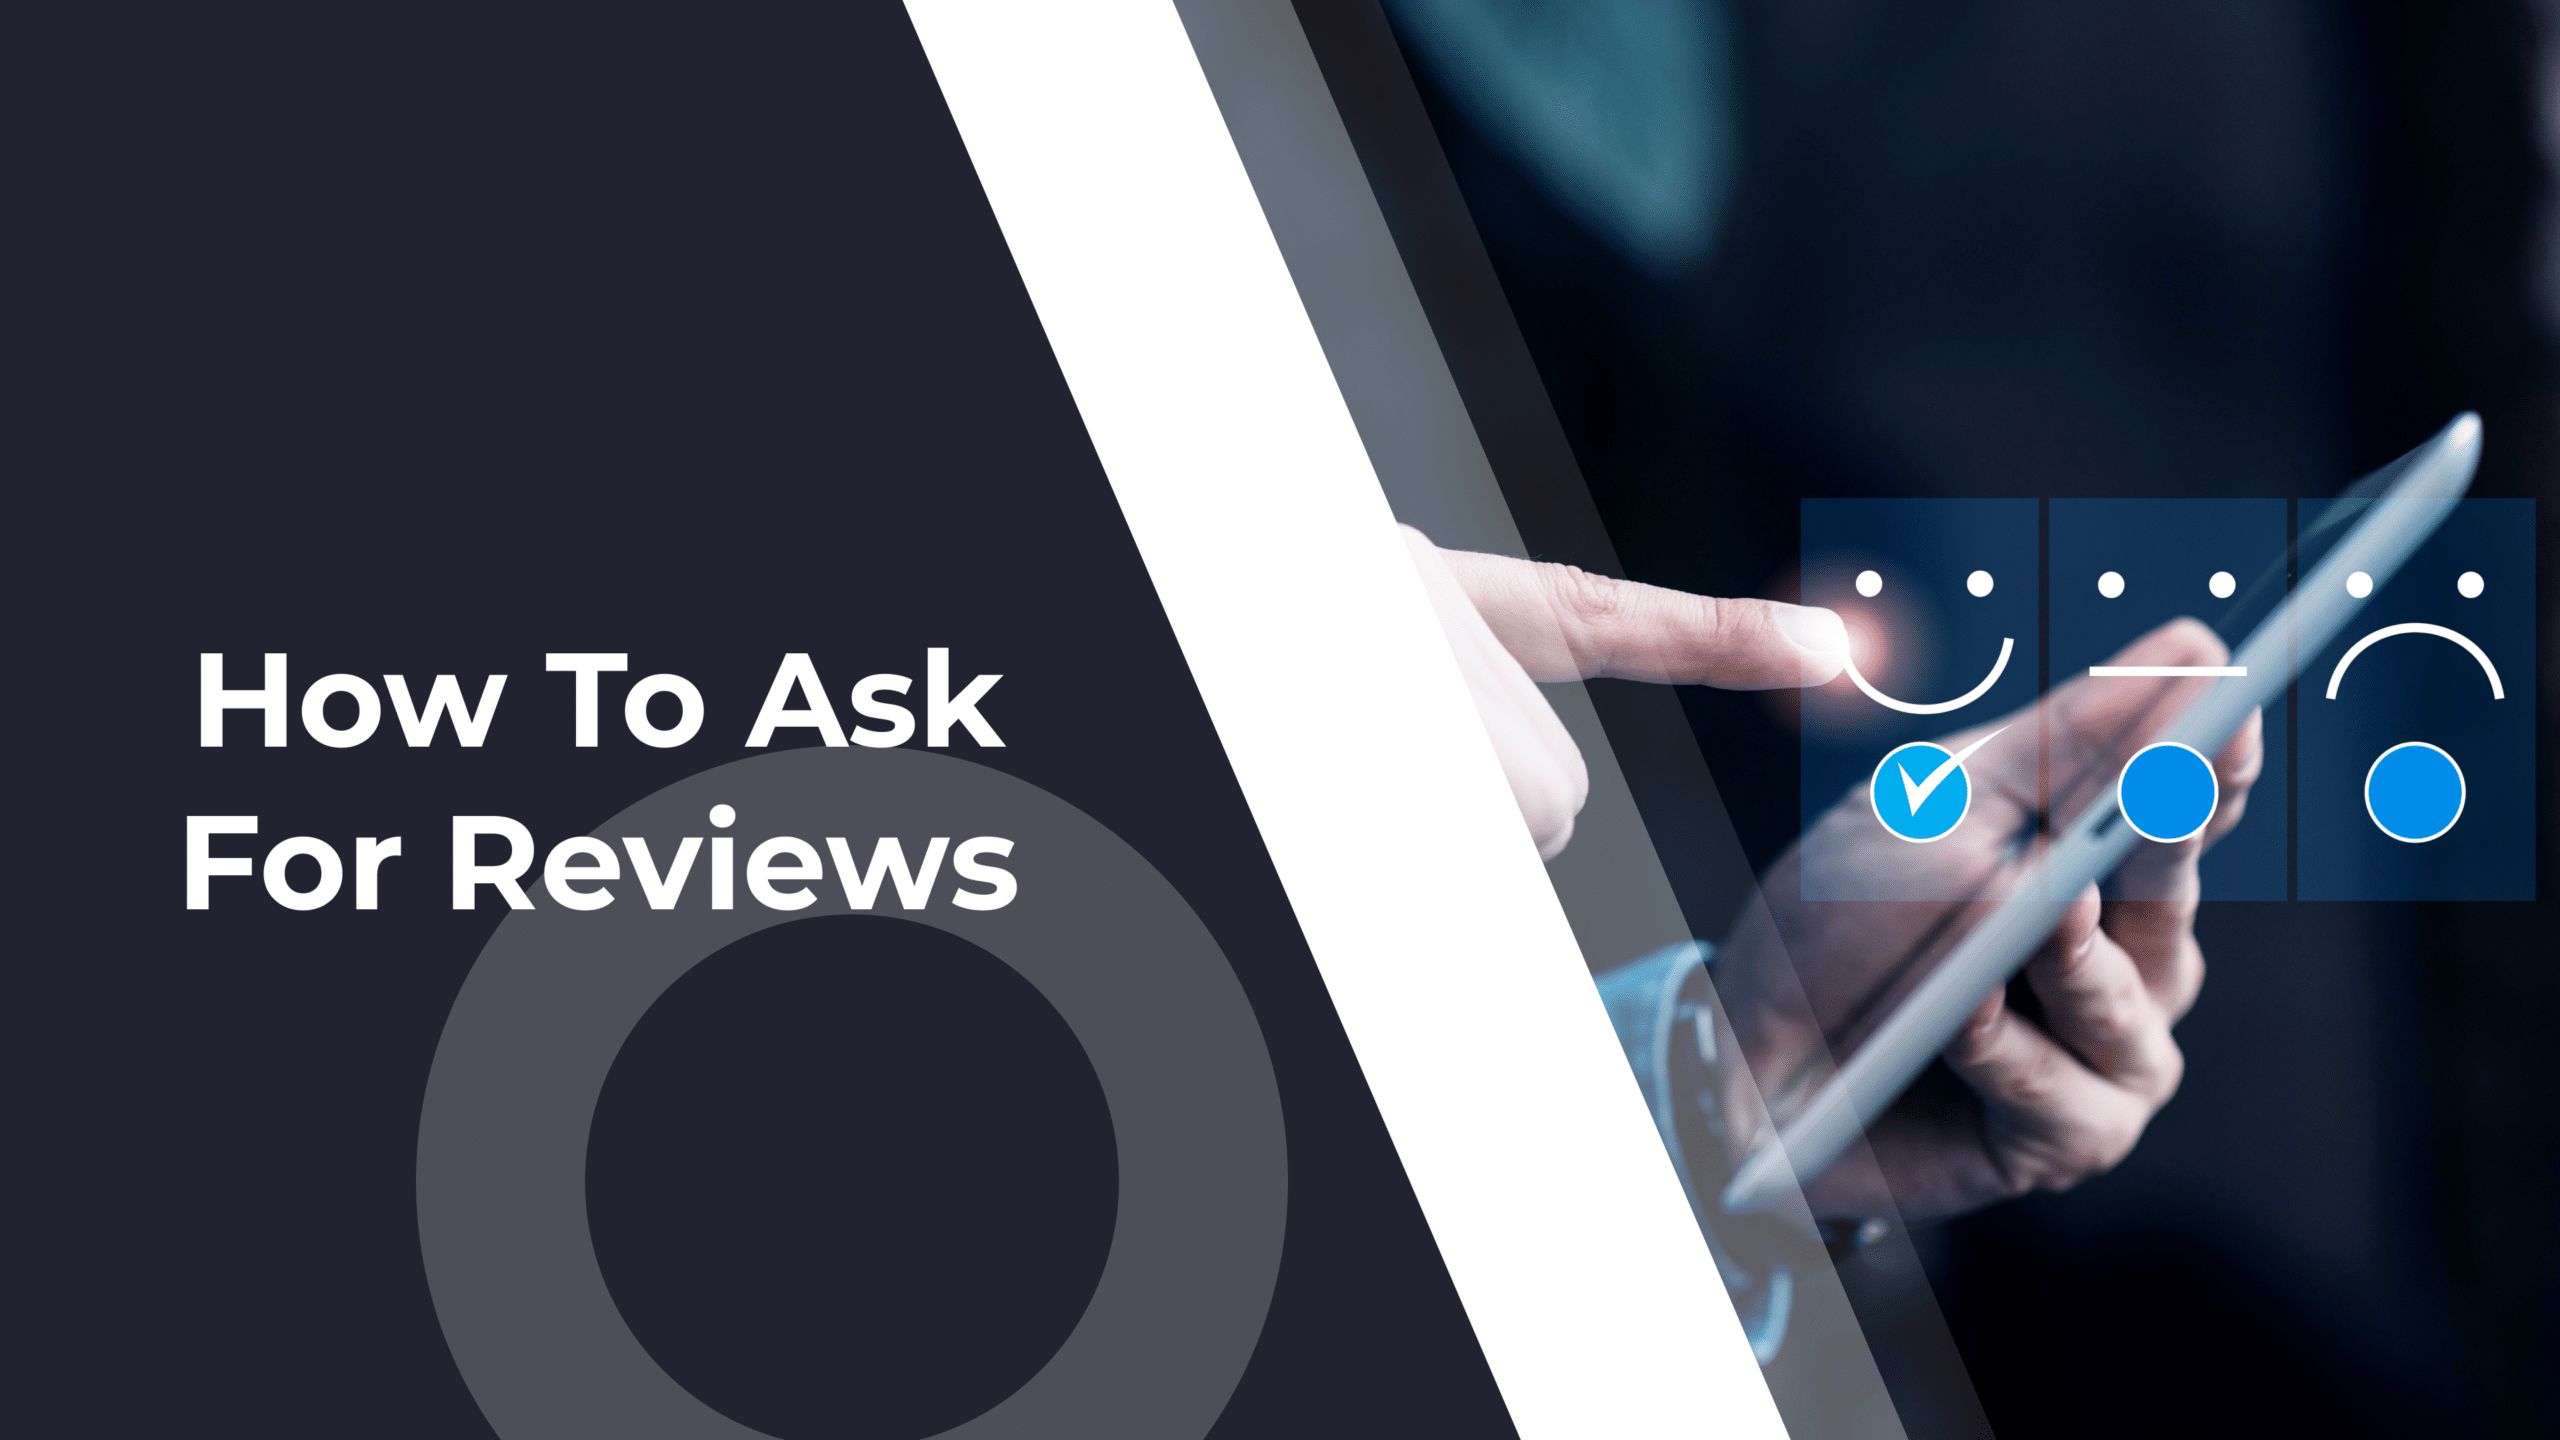 How To Ask Your Customers For Reviews: Top 10 Real-World B2B Principles To Follow